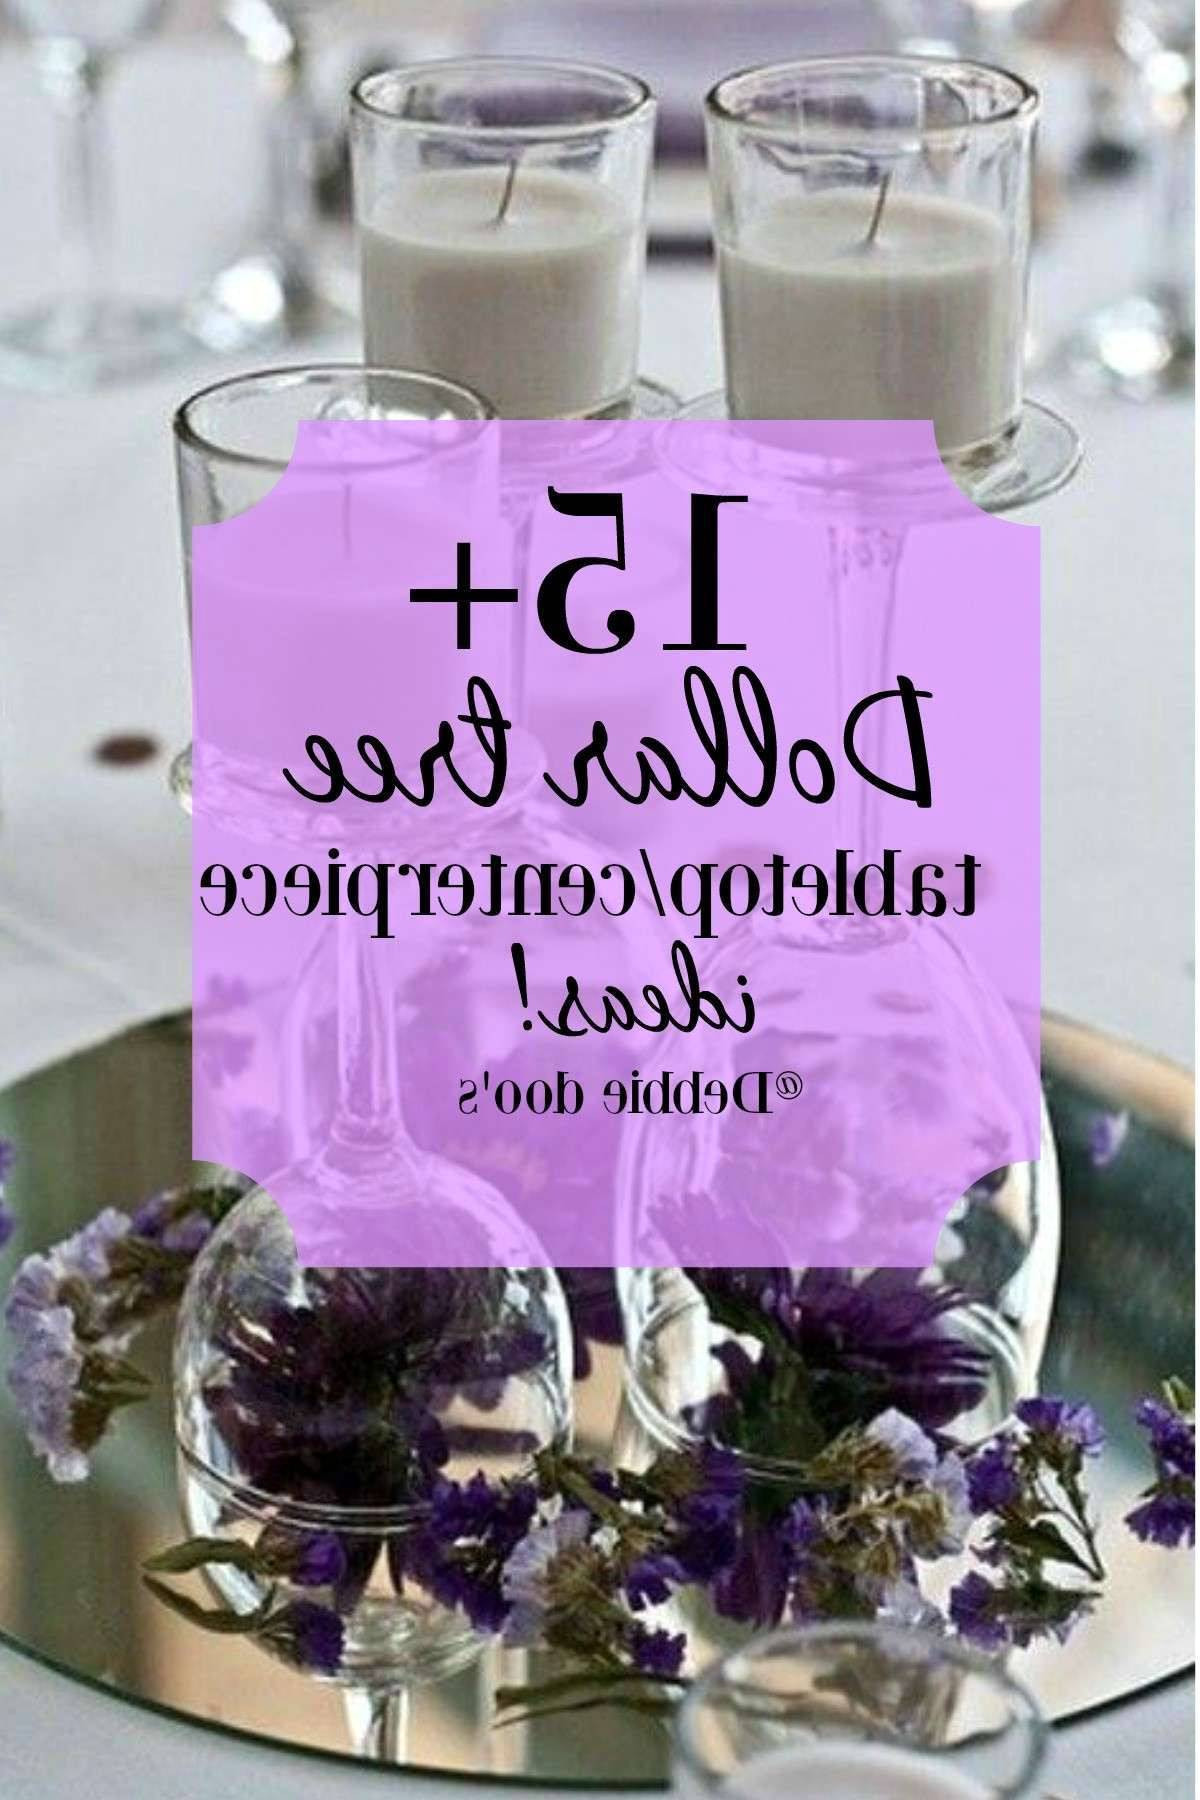 17 Lovely Dollar Store Square Vases 2024 free download dollar store square vases of purple wedding decorations for sale new dollar tree wedding regarding purple wedding decorations for sale new dollar tree wedding decorations awesome h vases dol